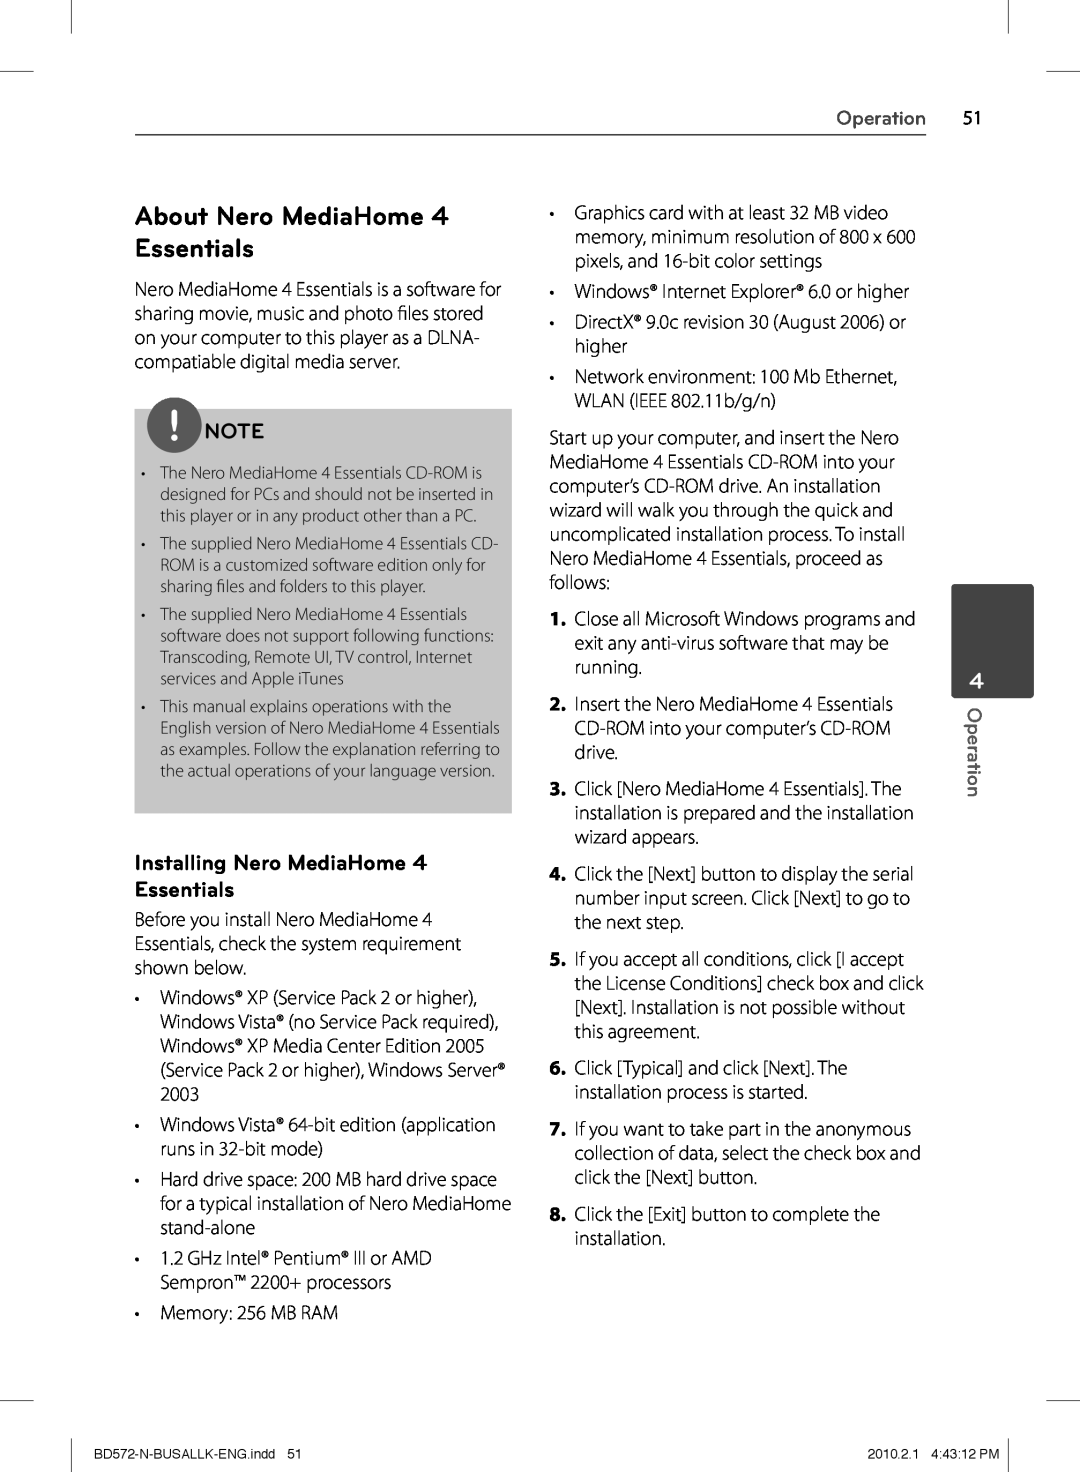 LG Electronics BD570 owner manual About Nero MediaHome 4 Essentials, Installing Nero MediaHome 4 Essentials, Operation 